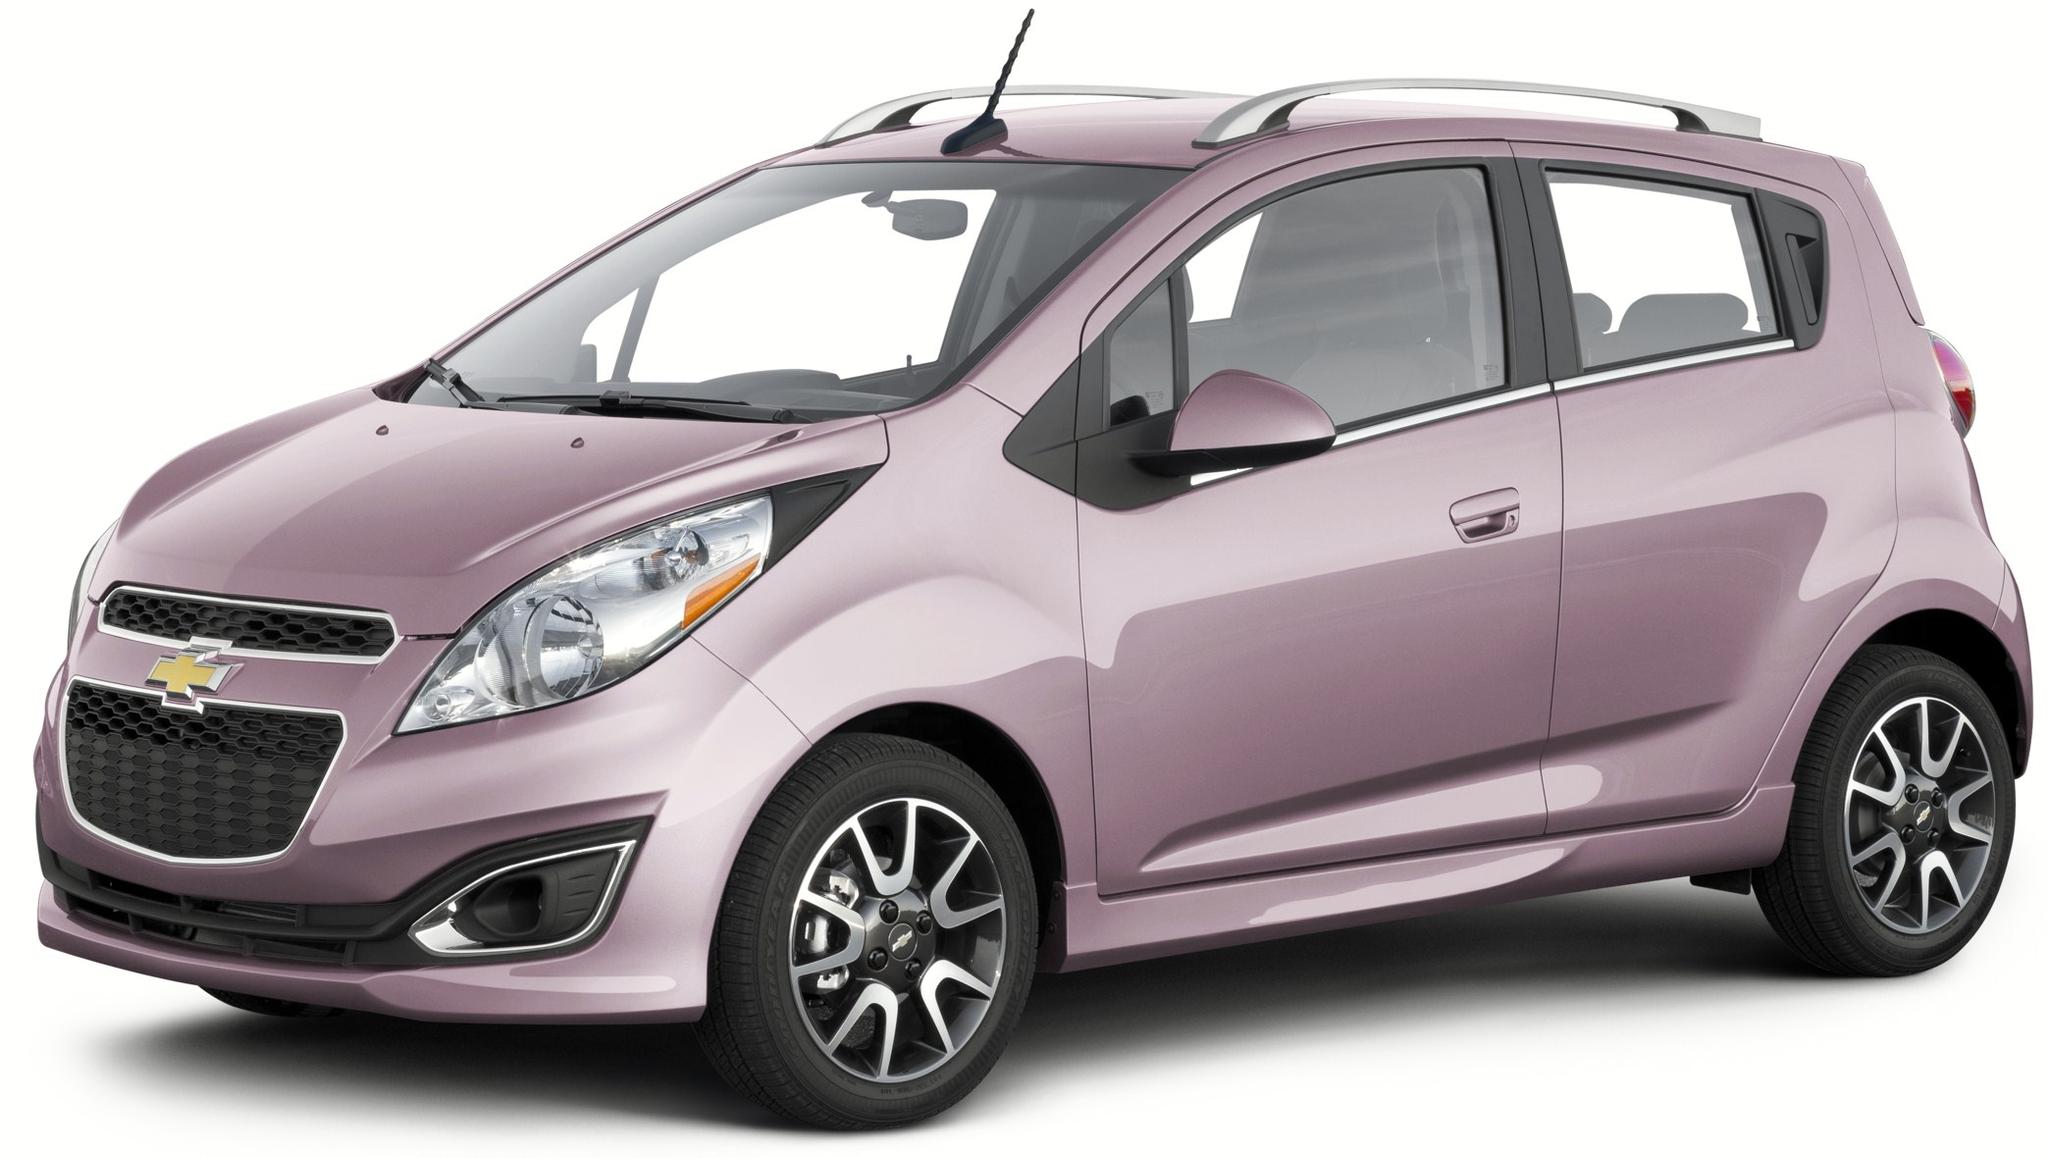 Chevrolet Spark 2003 Review, Amazing Pictures and Images